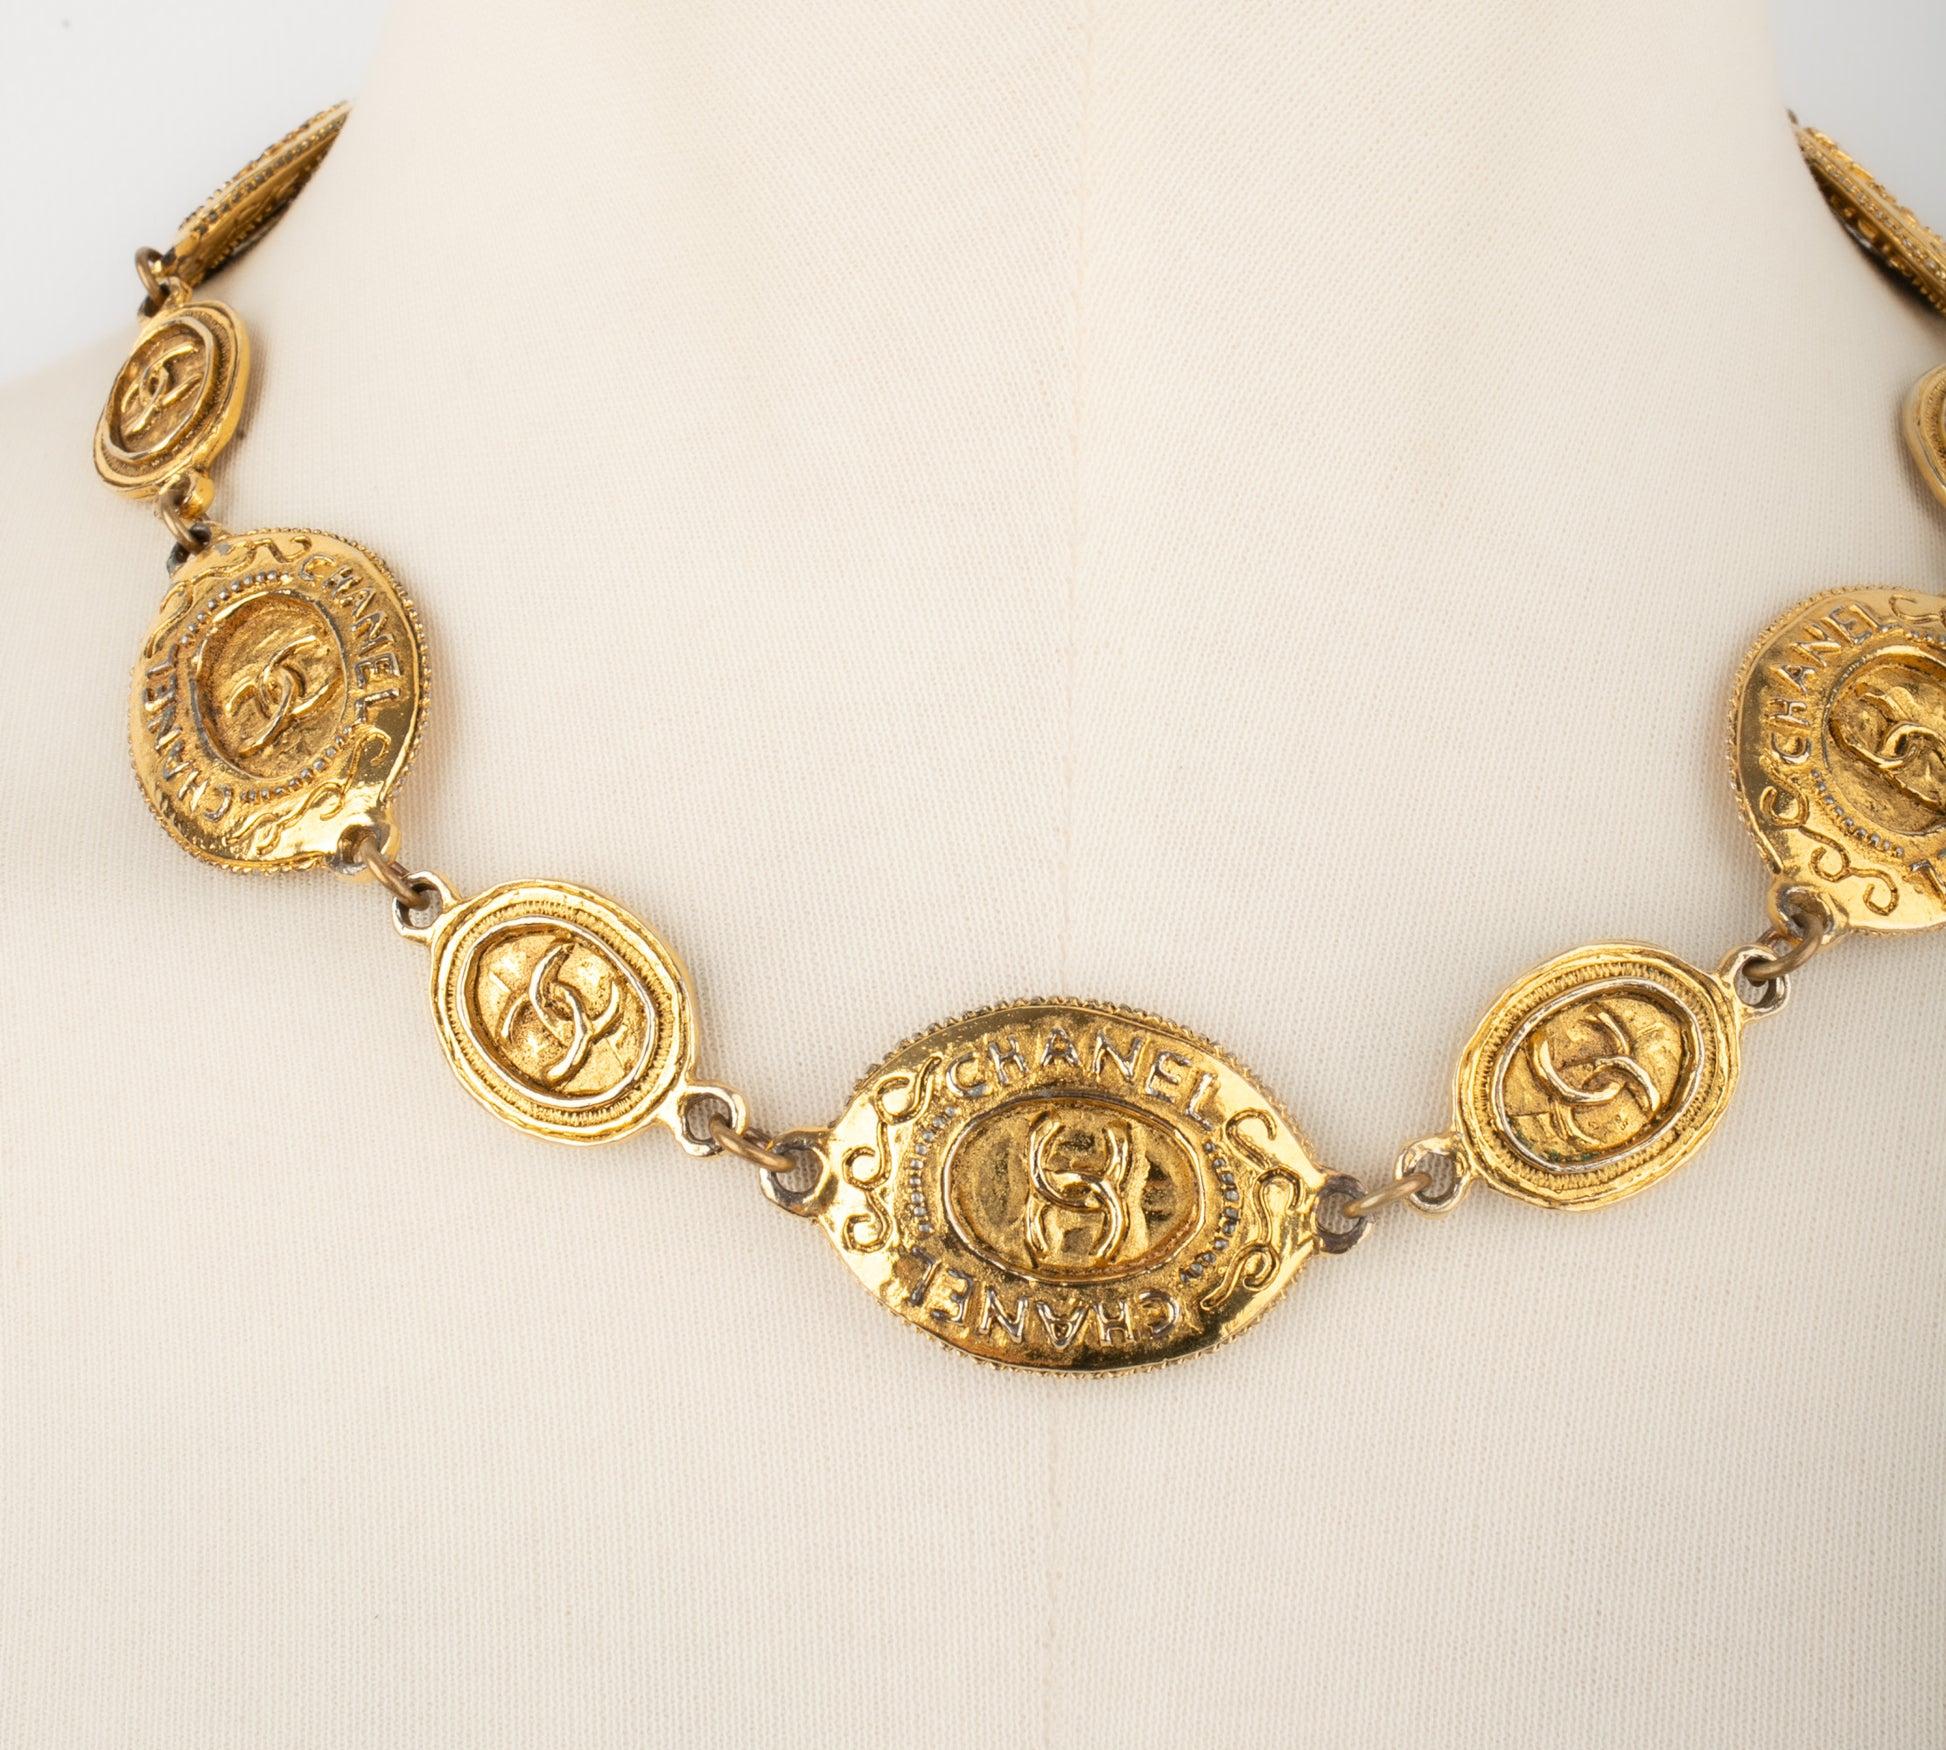 Chanel Golden Metal Short Necklace with Oval Medallions In Good Condition For Sale In SAINT-OUEN-SUR-SEINE, FR